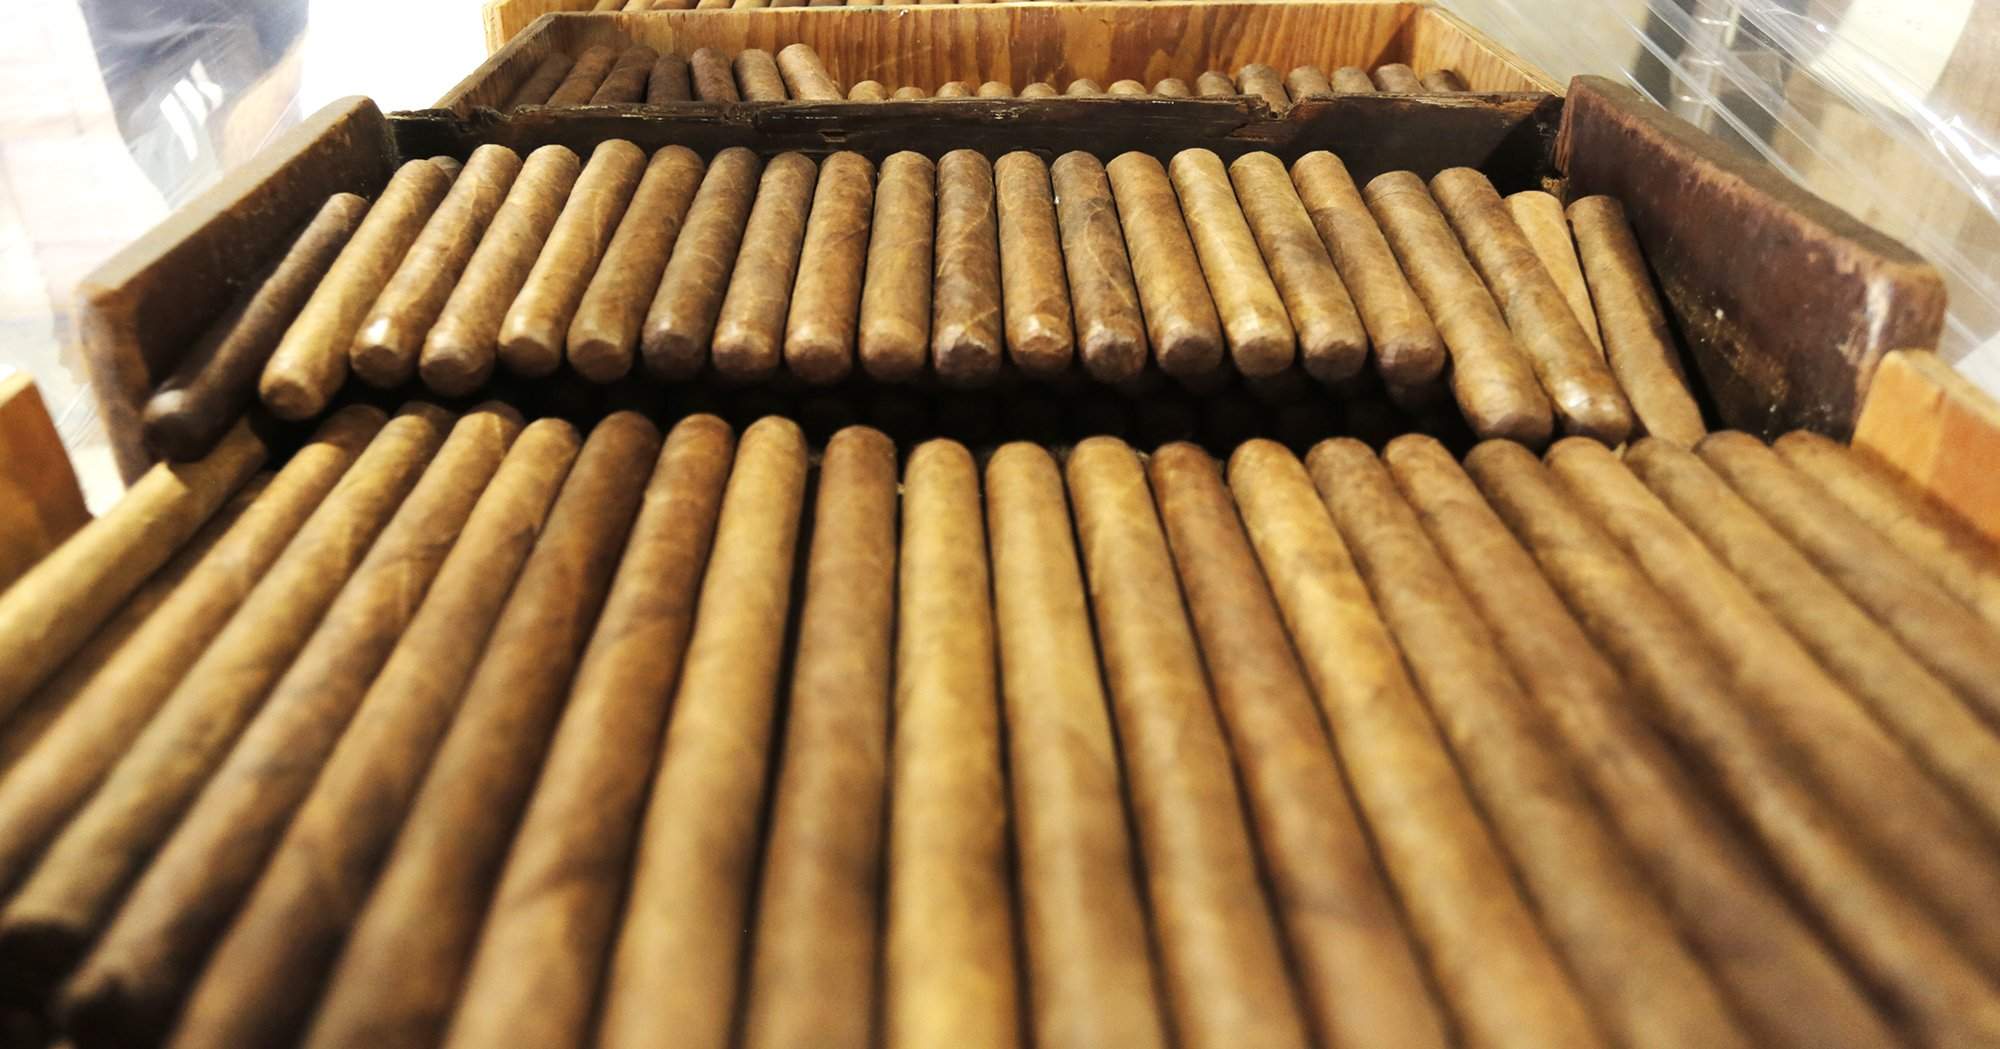 Trends in the Cigar Industry